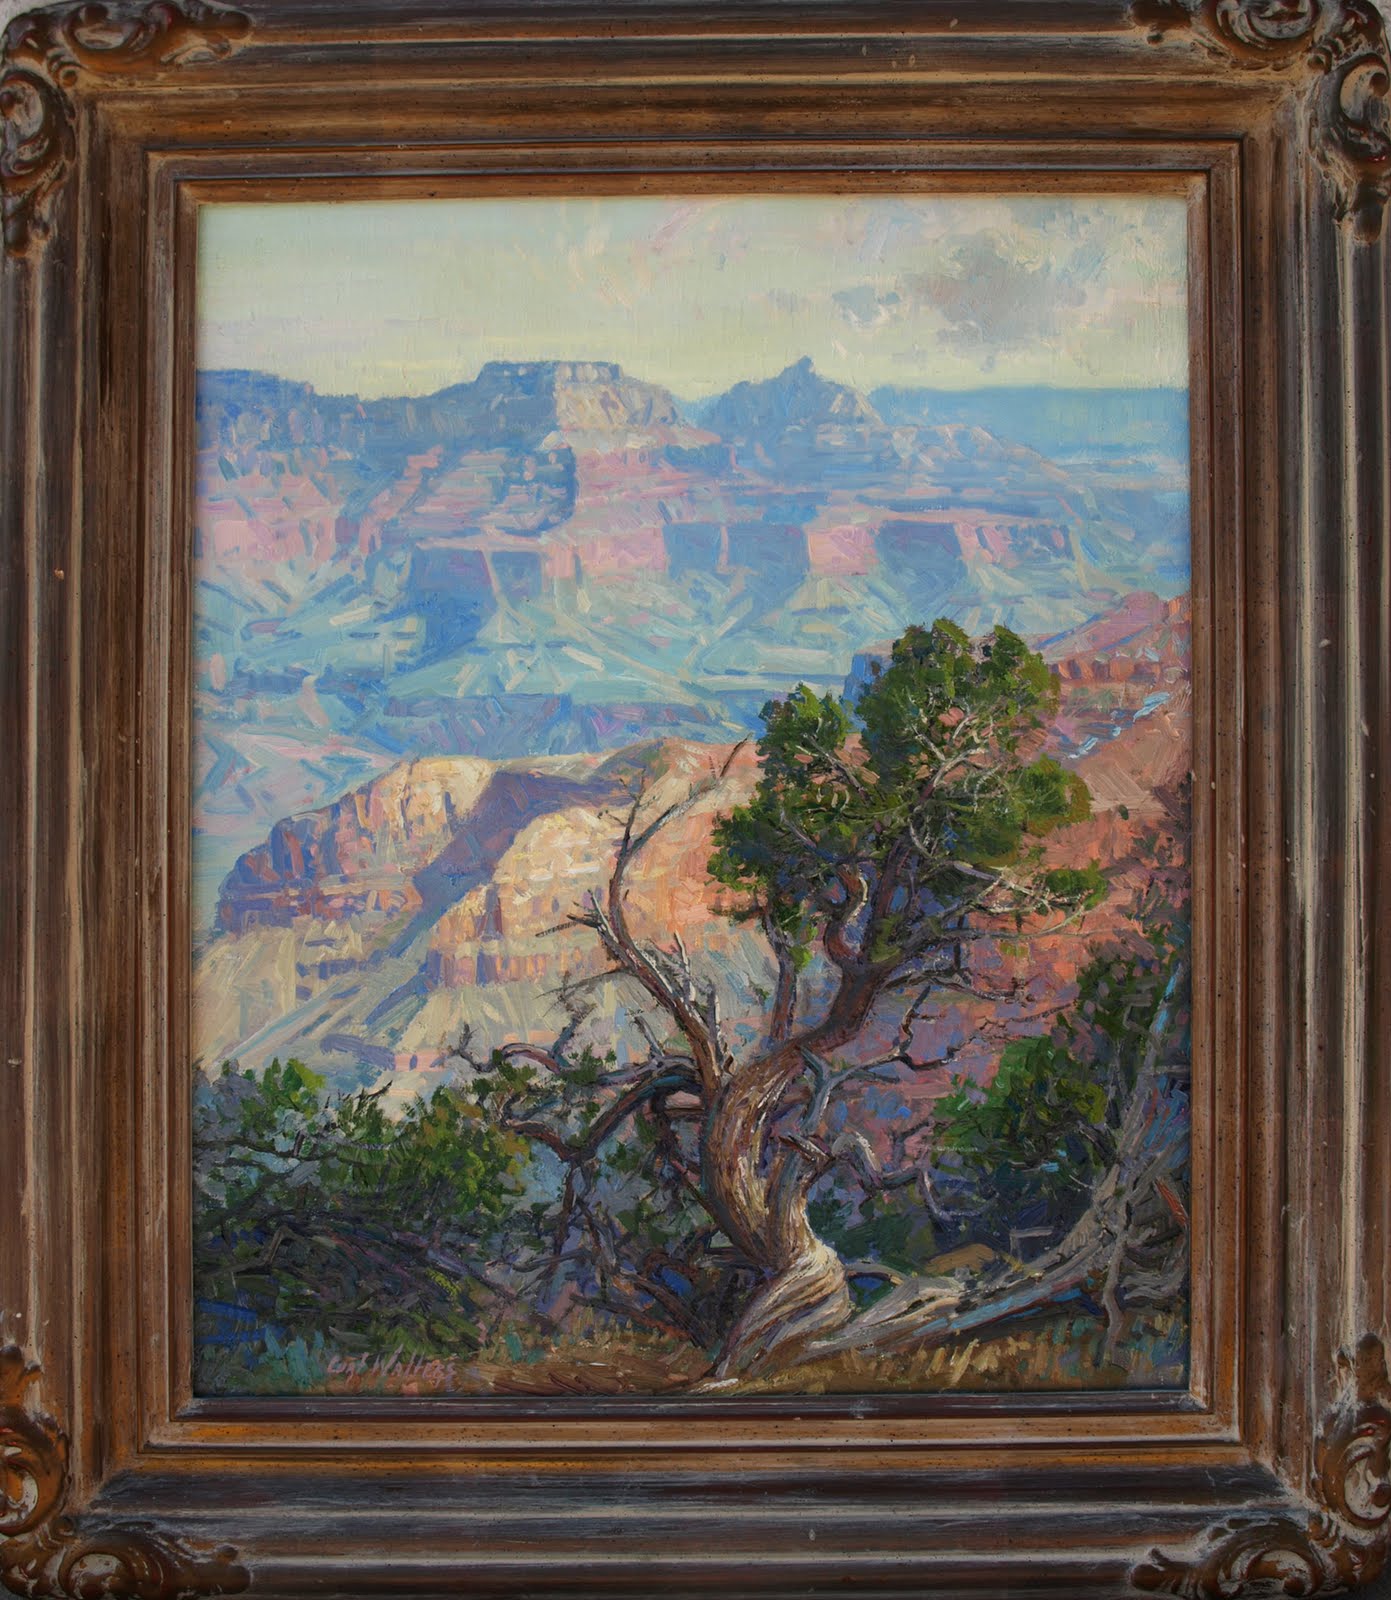 Saks Galleries Blog: Curt Walters painter of the Grand Canyon1391 x 1600